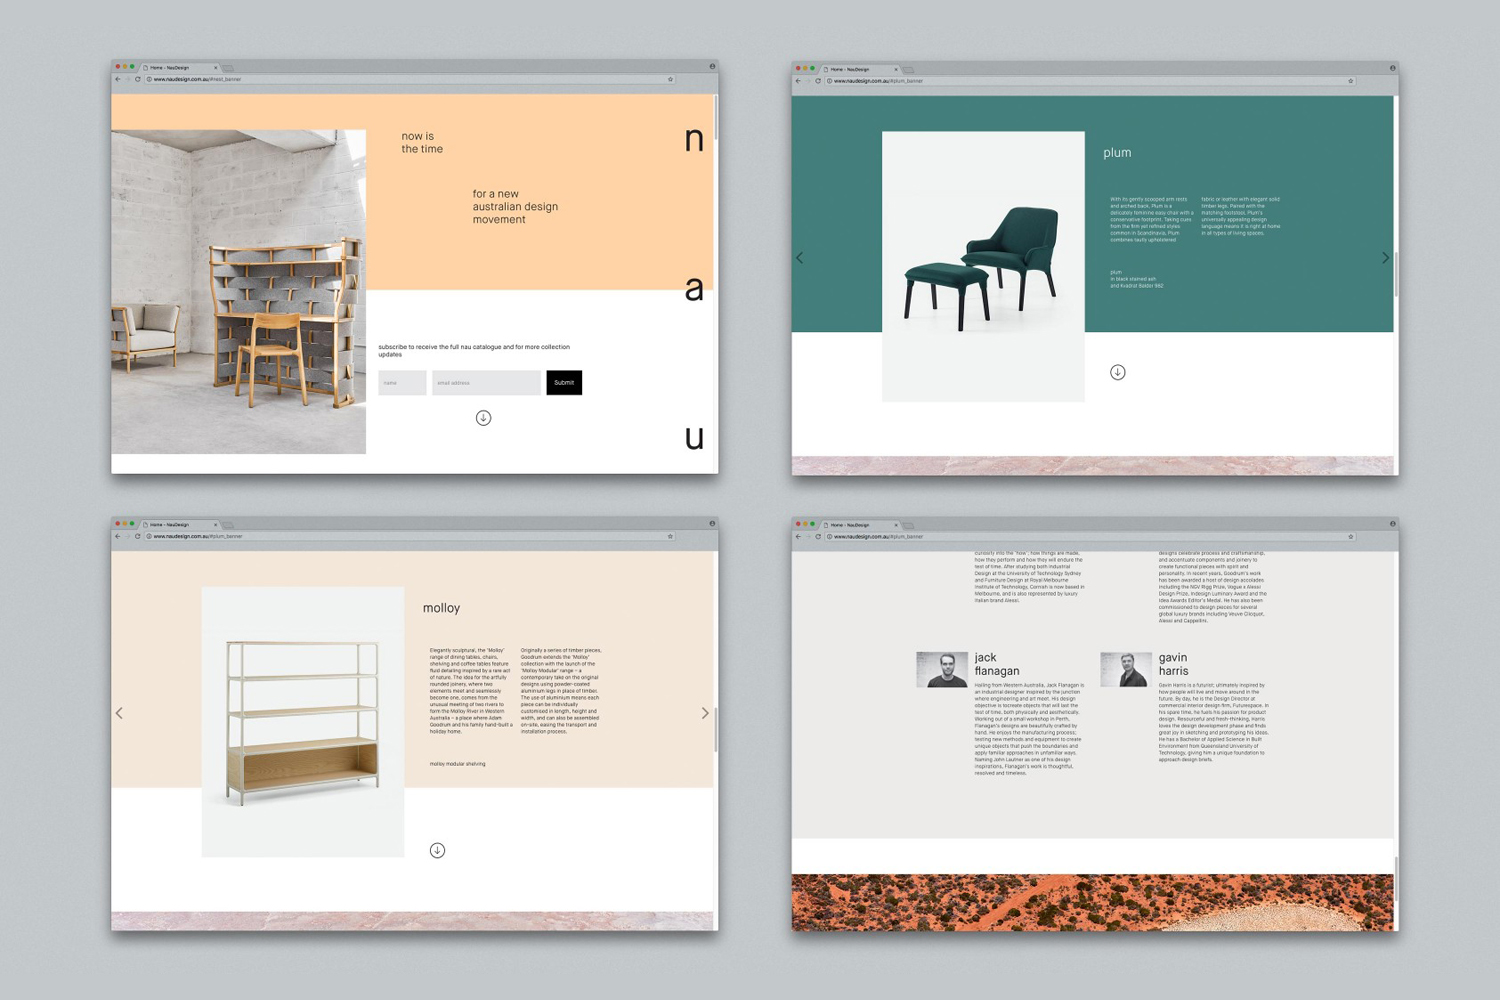 Brand identity and website by Design by Toko for Cult's new contemporary furniture range NAU